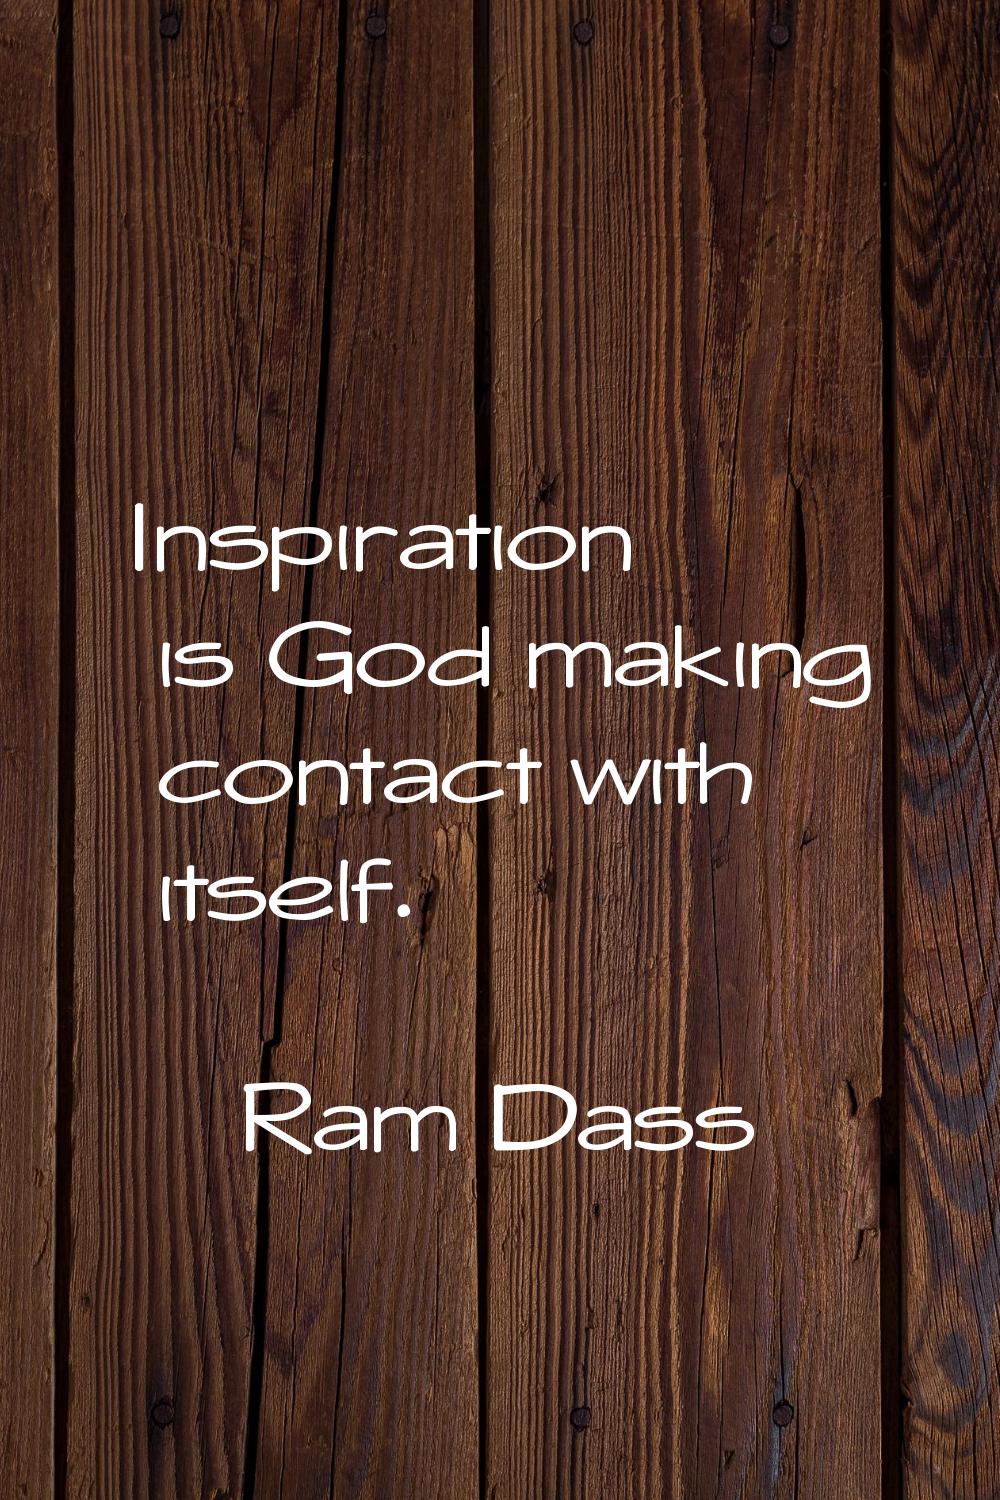 Inspiration is God making contact with itself.